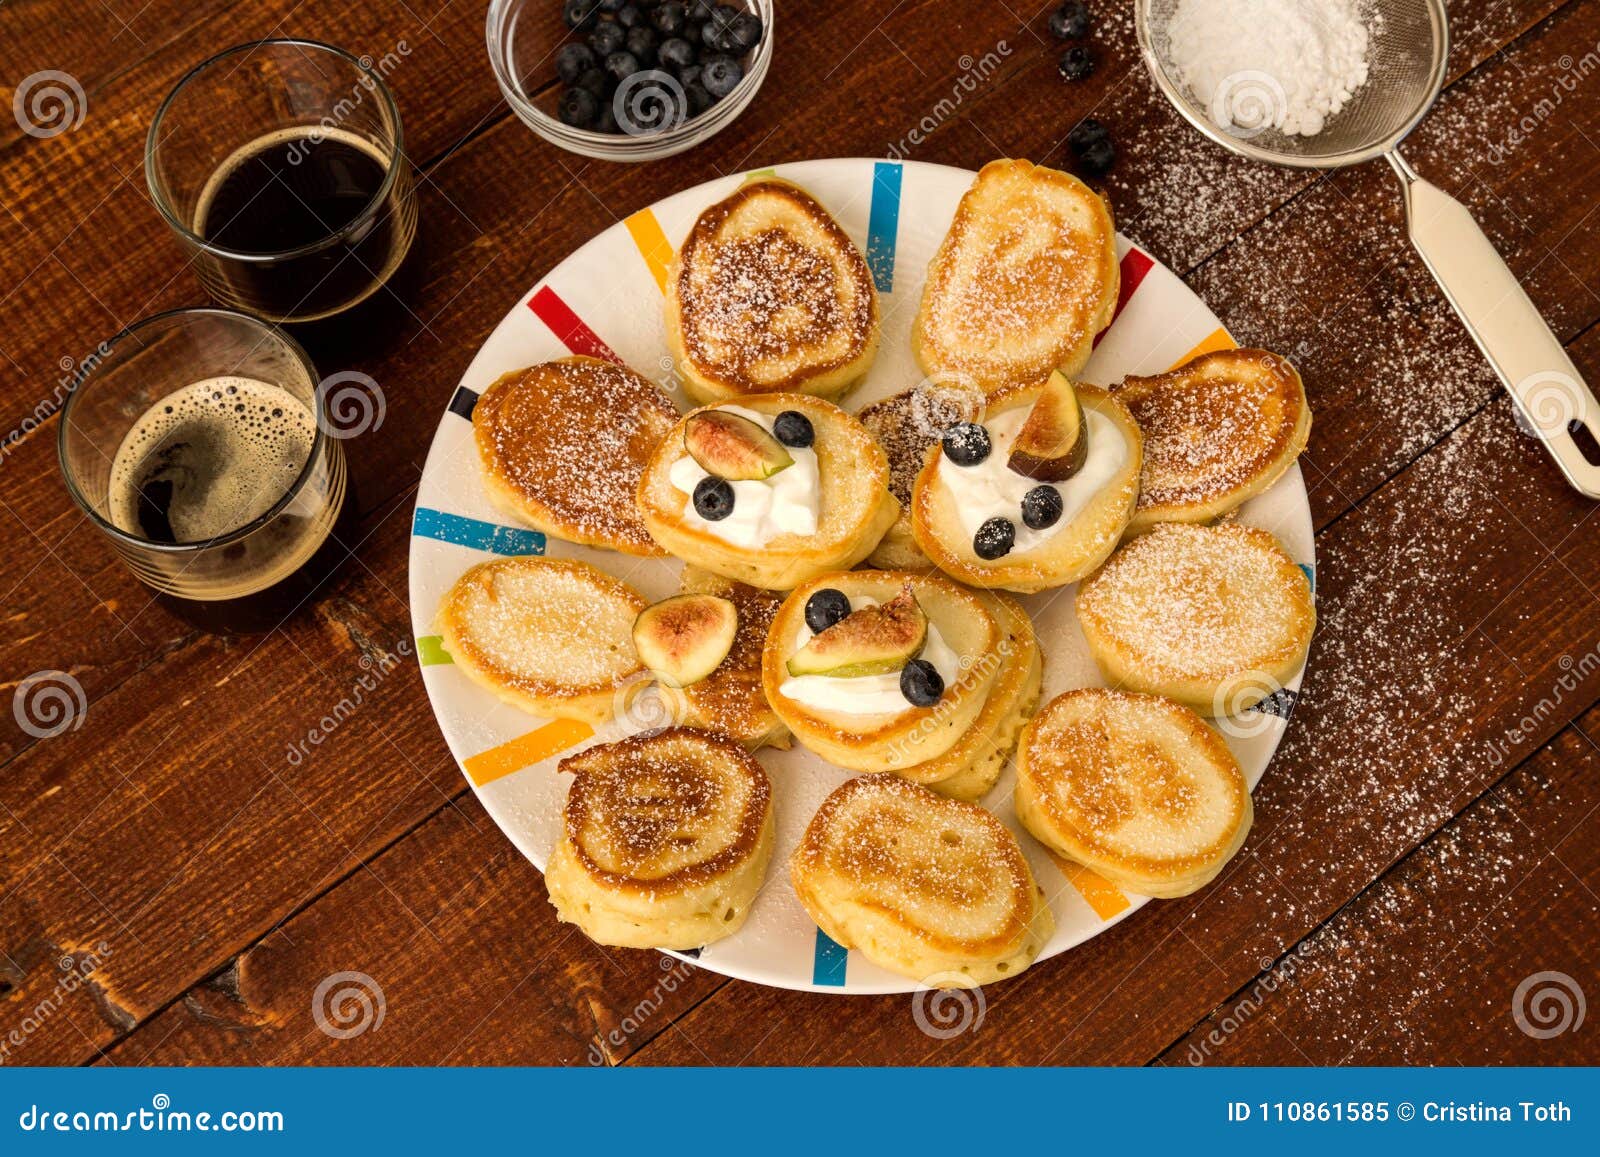 oladi - traditional pancakes for breakfast in the republic of moldova